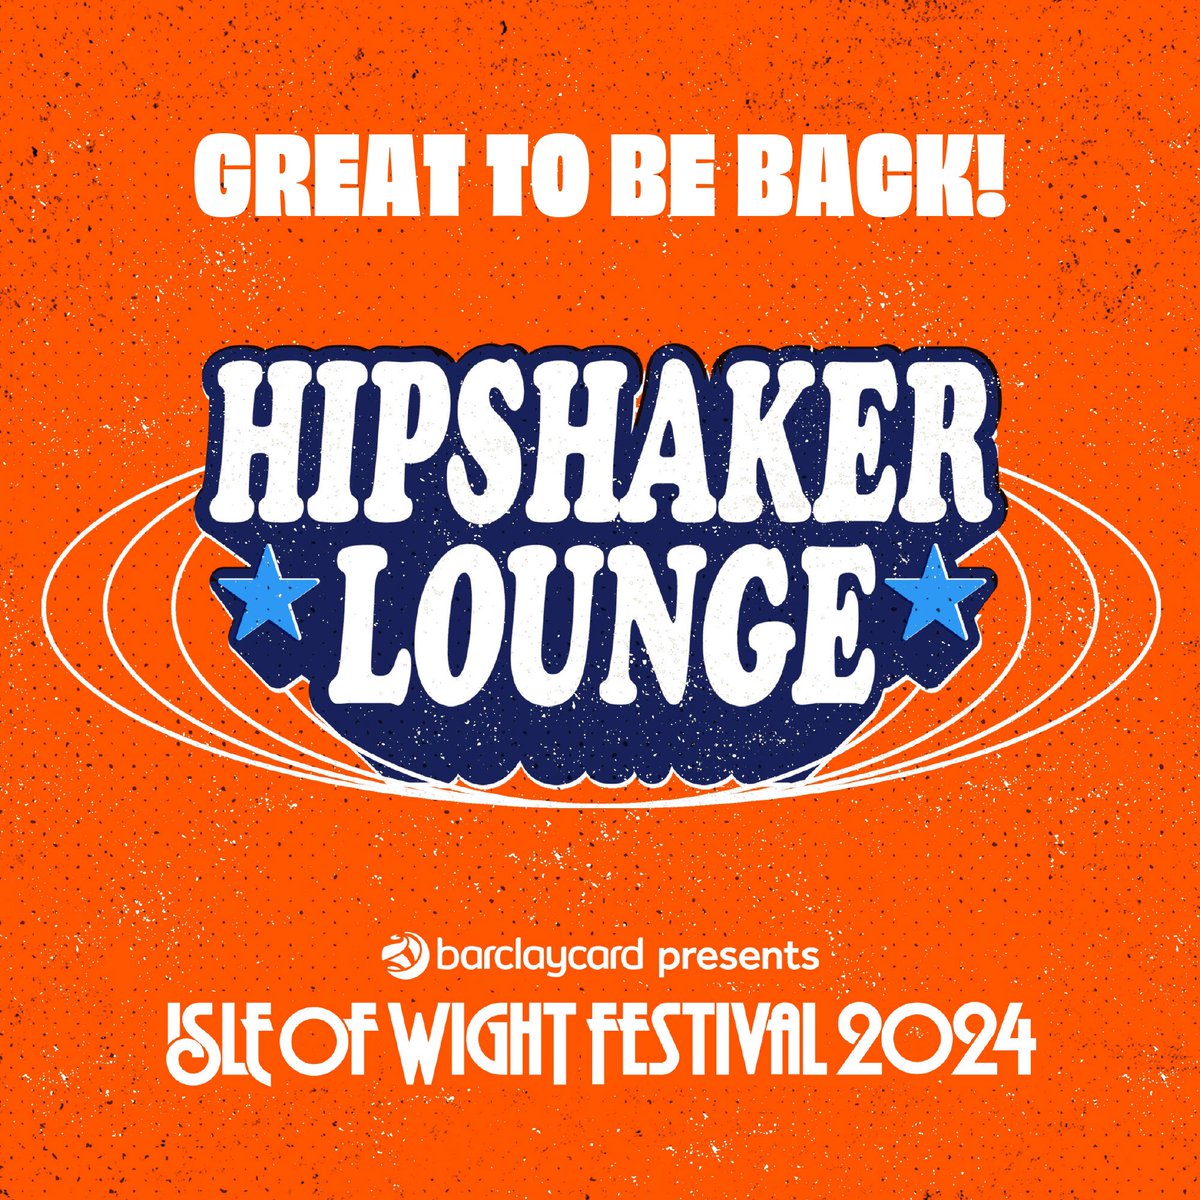 Keep ‘em peeled for an Isle of Wight Festival announcement around 5pm tomorrow 😁

#IOW2024
#BarclaycardxIOW
#Hipshaker
#HipshakerLounge
@IsleOfWightFest